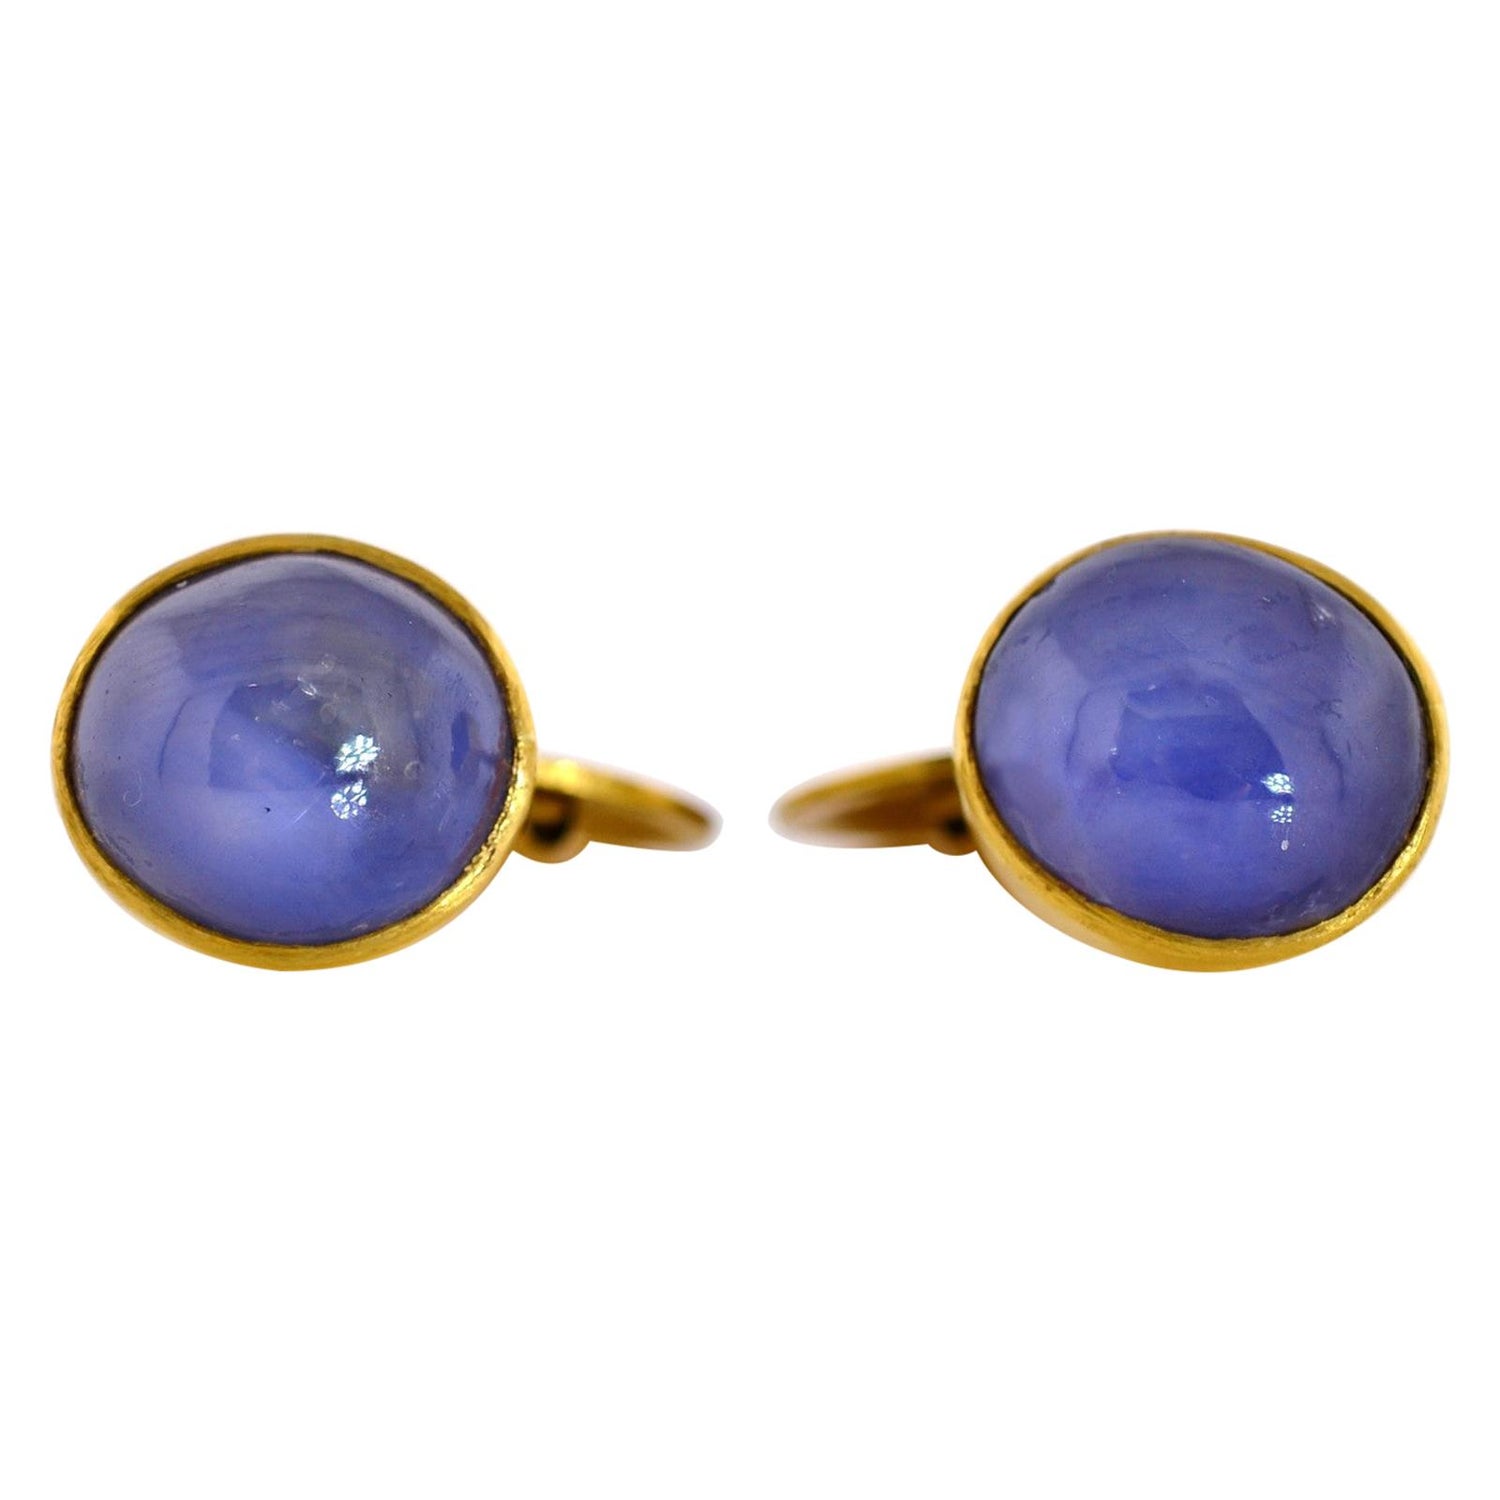 Vintage Golden Mesh with Oval Brown Star Sapphire Like Cabochon Cufflinks.